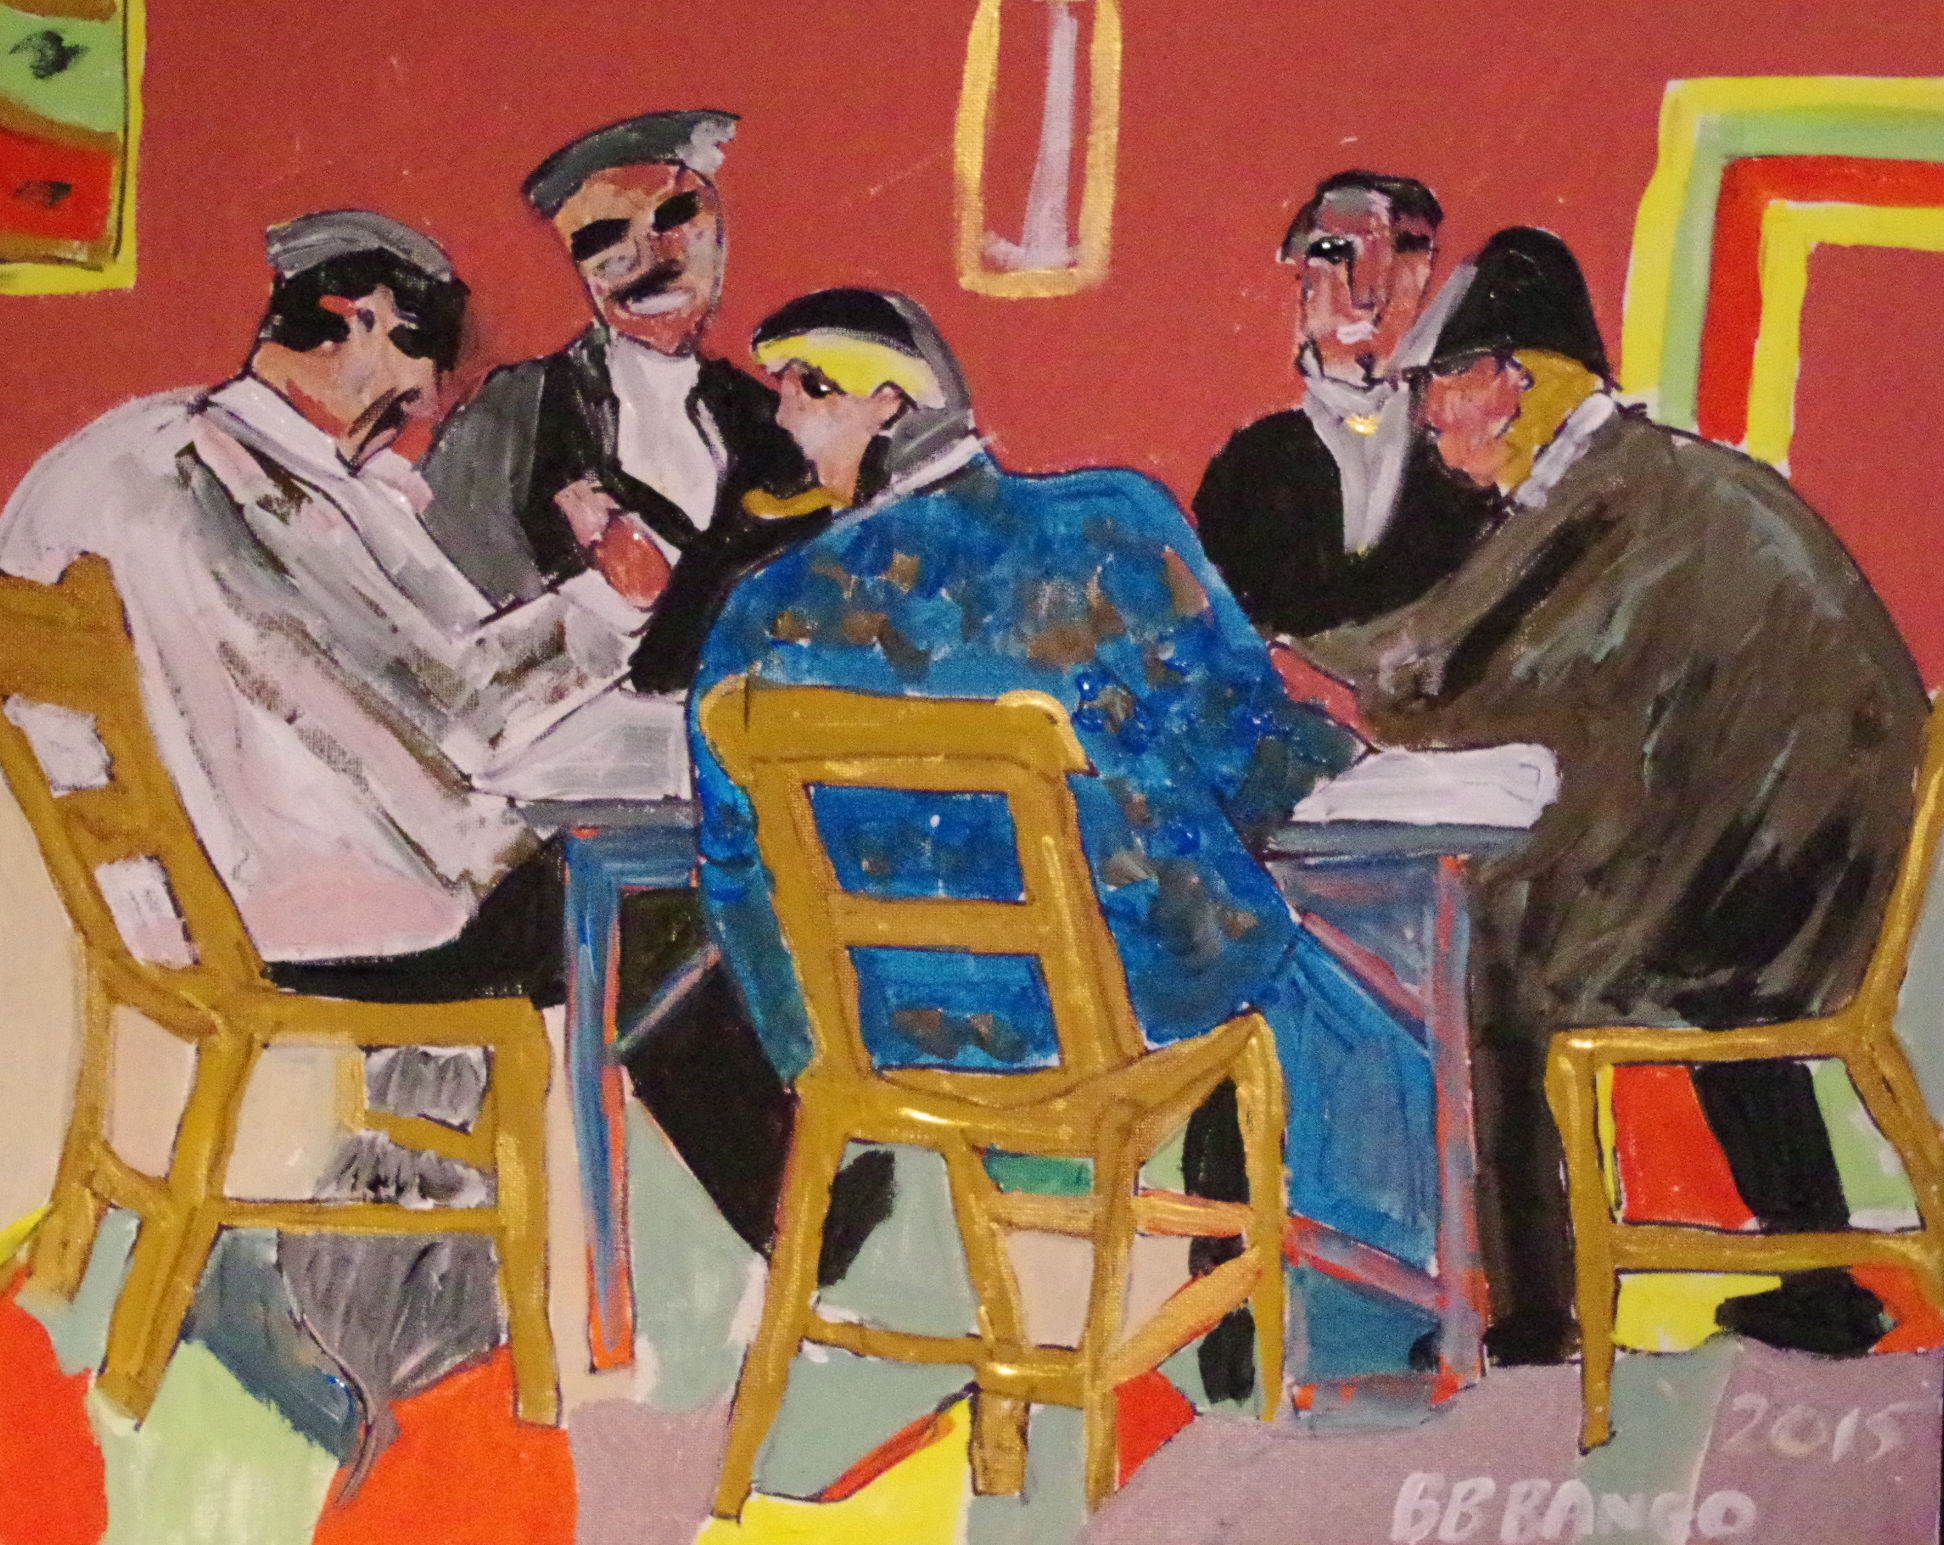 'Playing Cards' by BB Bango based 20 by 16 inch acrylic on canvas. Sold to art collector in UK